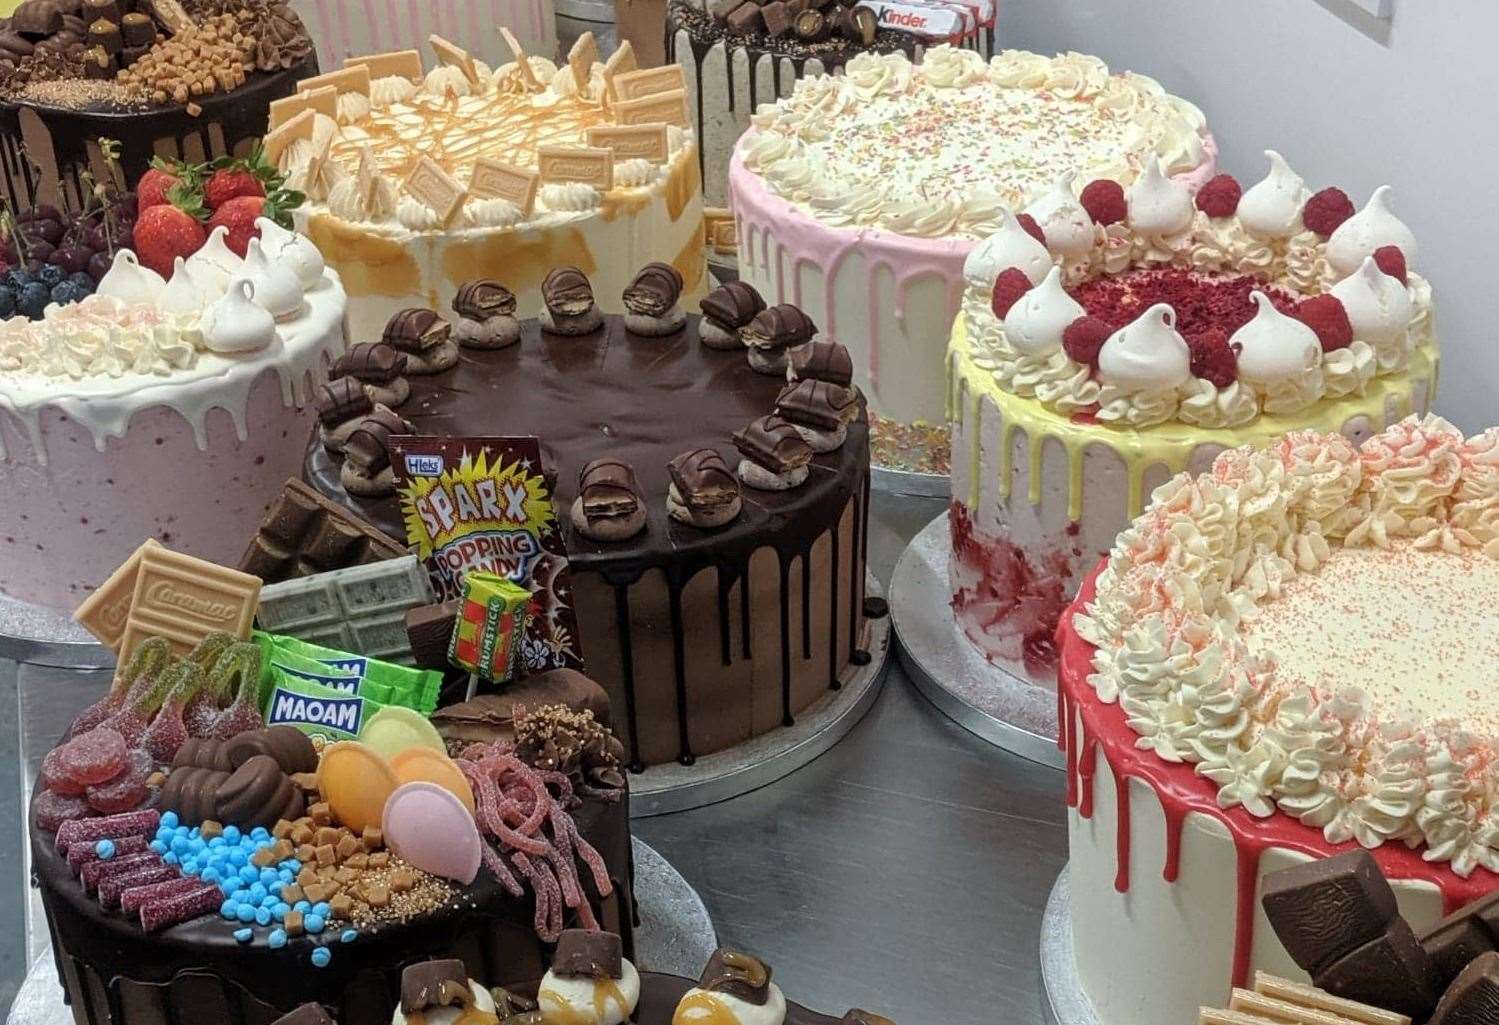 The Lane also has a bakery which makes least 20 celebration cakes a week